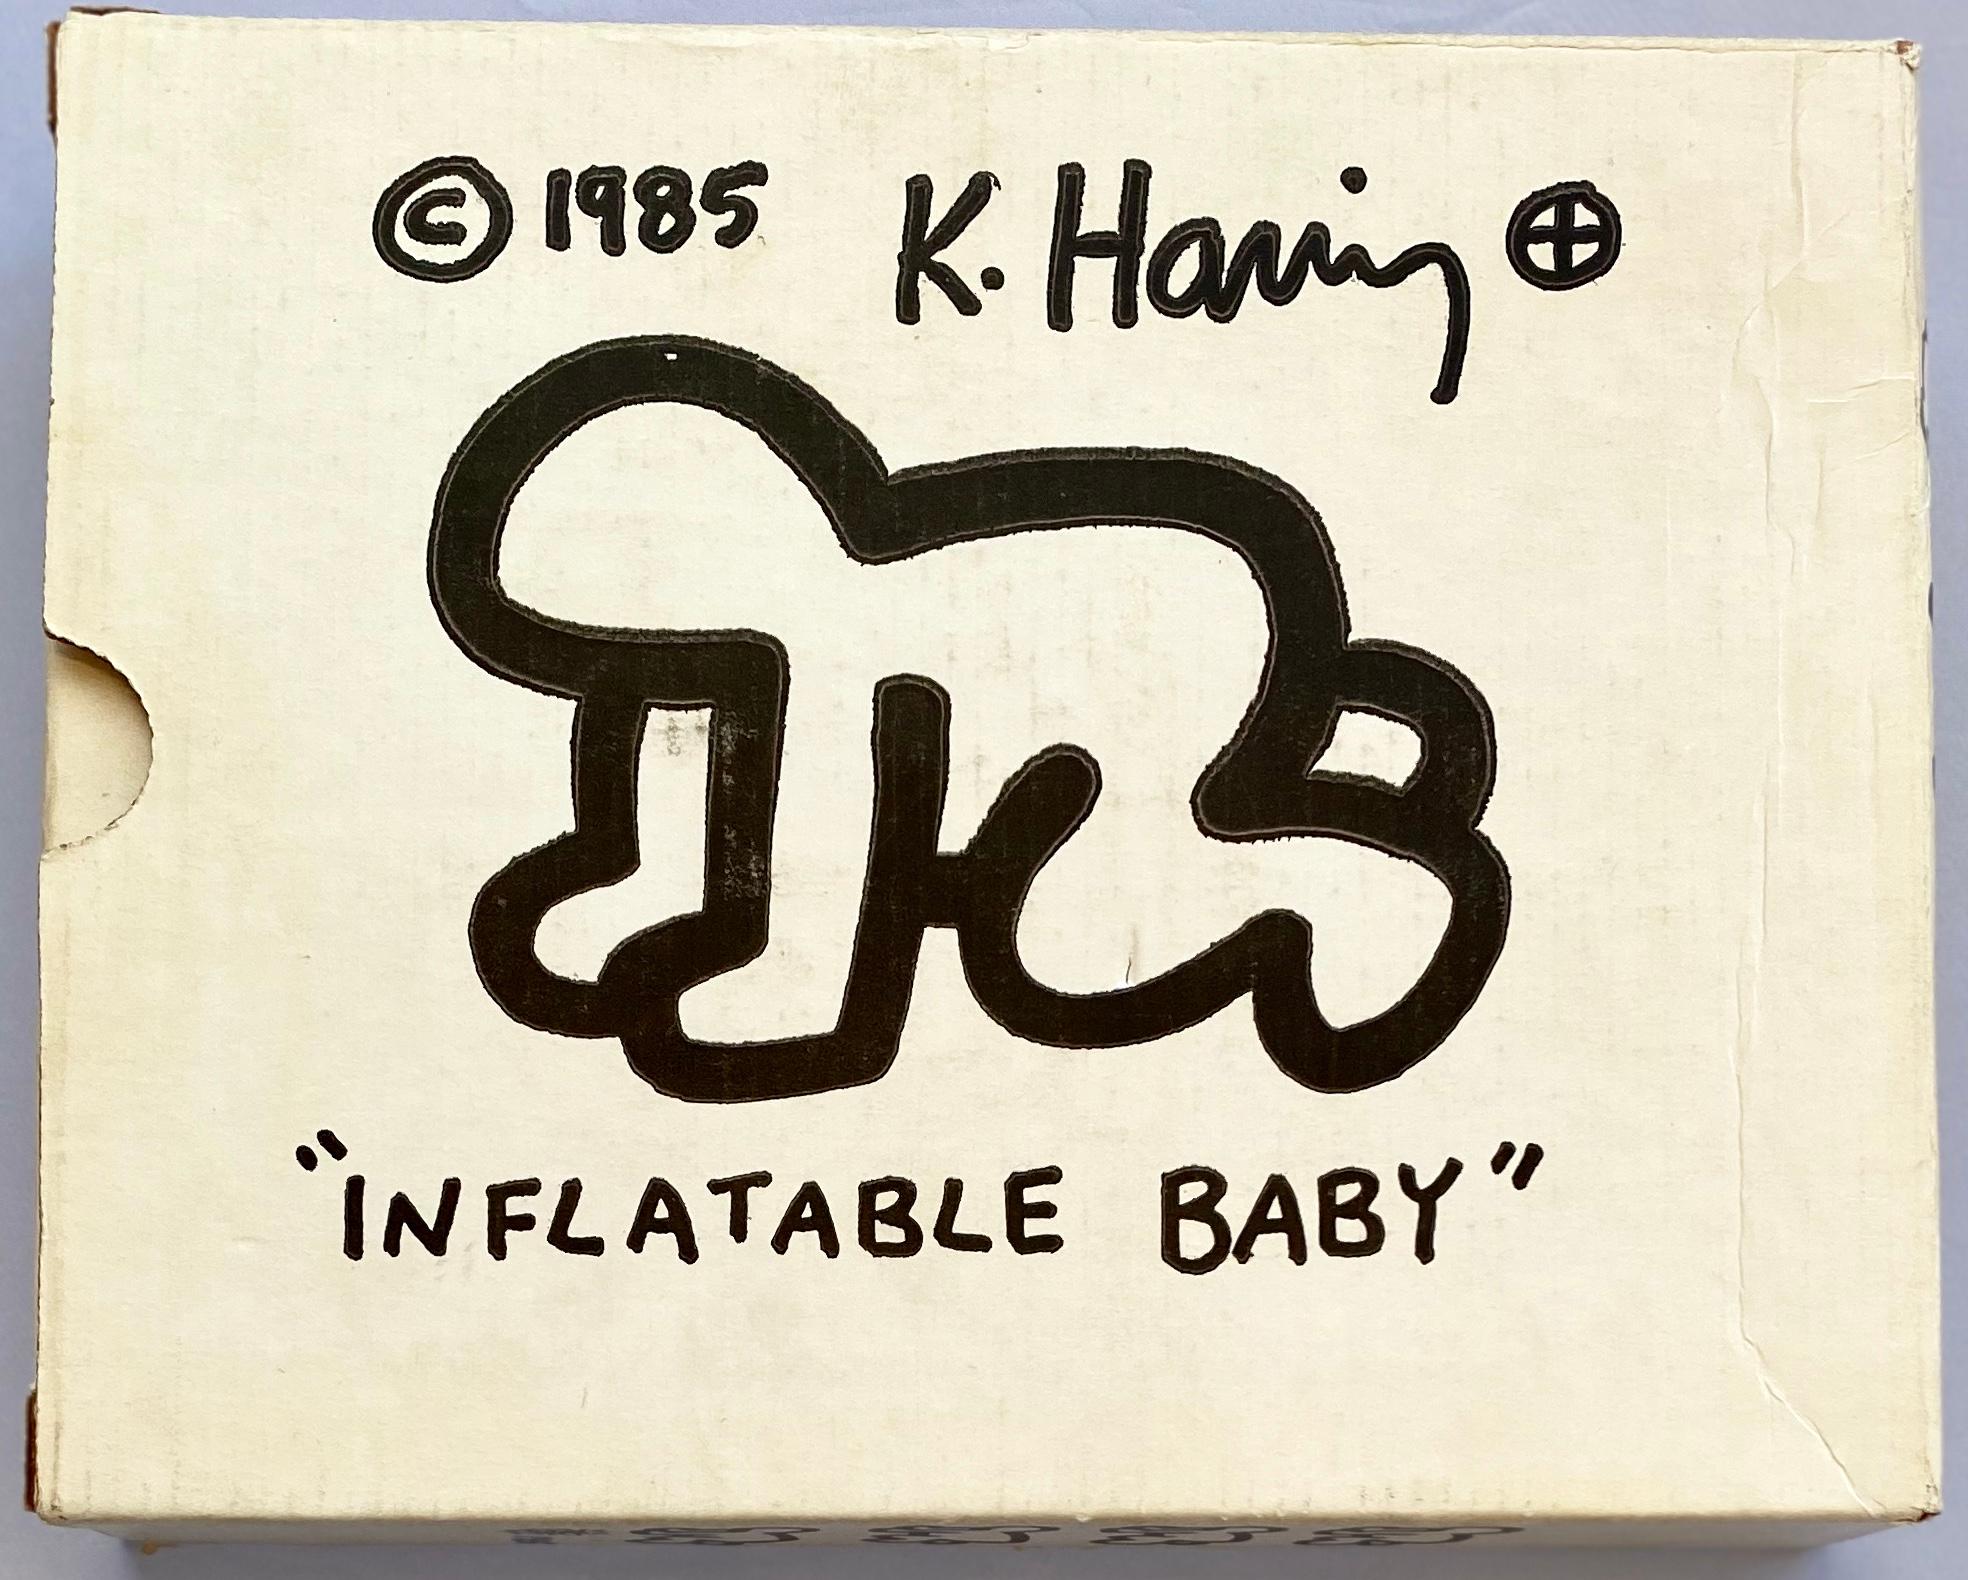 Keith Haring Inflatable Baby 1985: 
A classic original 1980s Keith Haring Pop Shop collectible that makes for unique display piece both in and out of the box. These black and white inflatable multiples were sold by Haring as affordable sculpture,